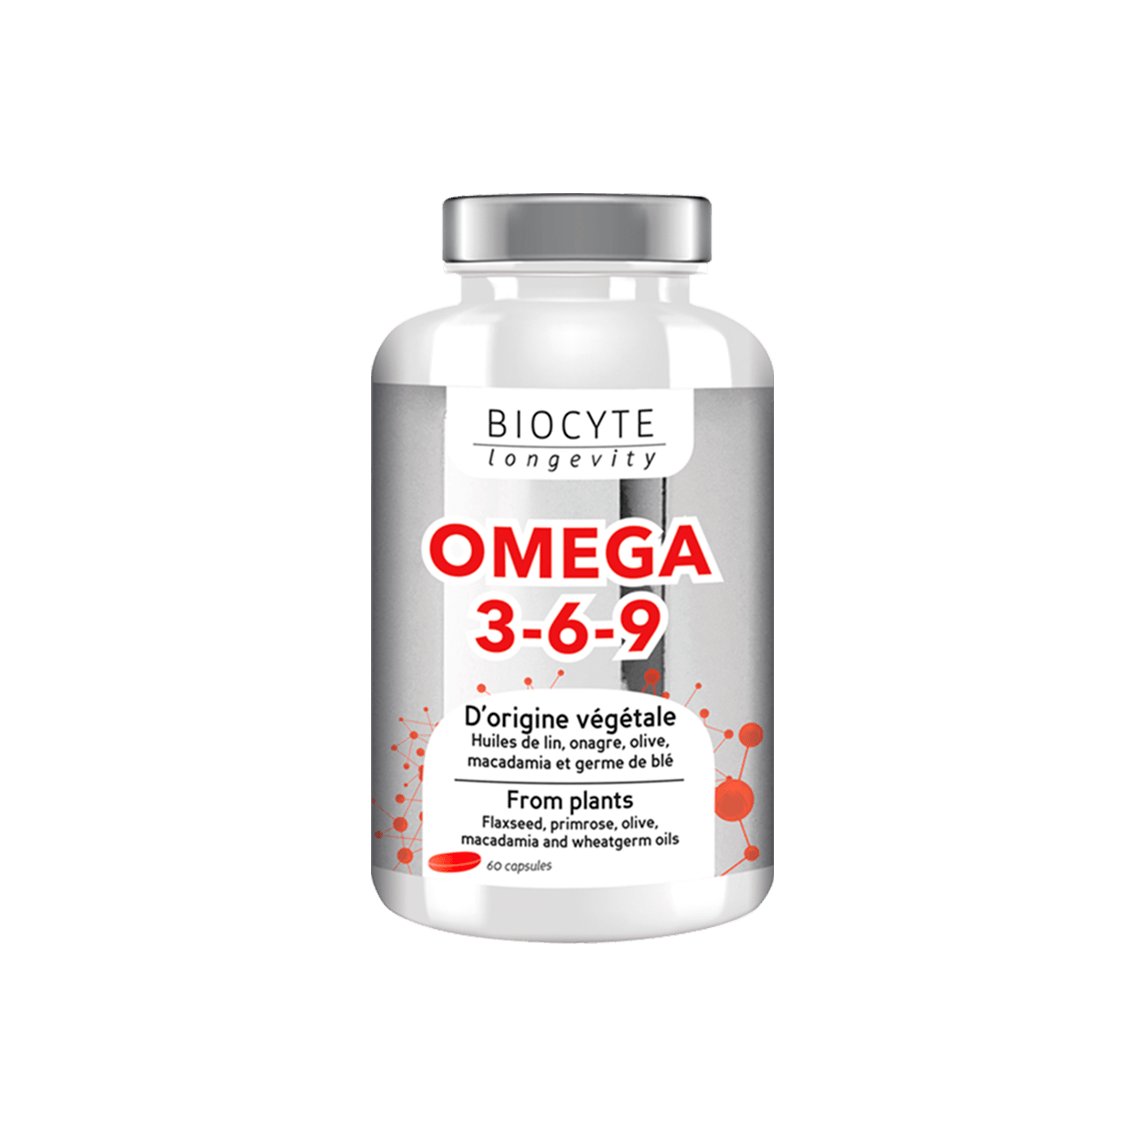 OMEGA 3-6-9: 60 капсул - 1282,50грн